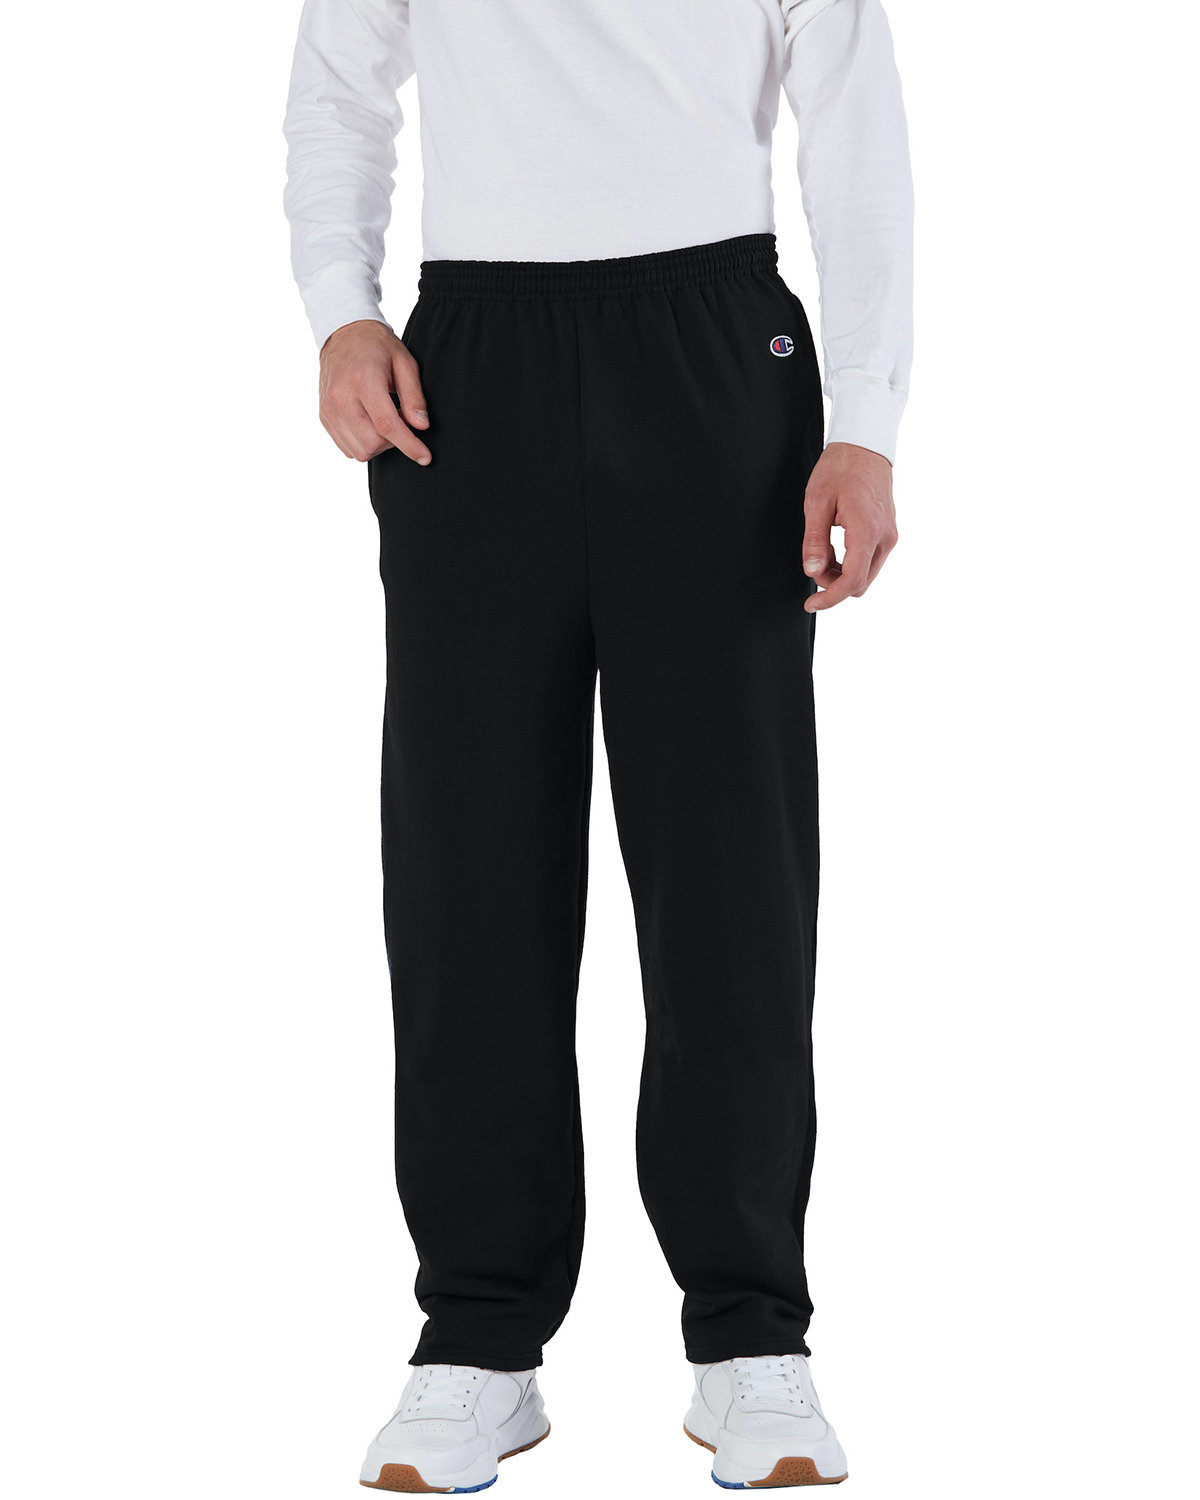 Champion Adult Powerblend® Open-Bottom Fleece Pant with Pockets BLACK 